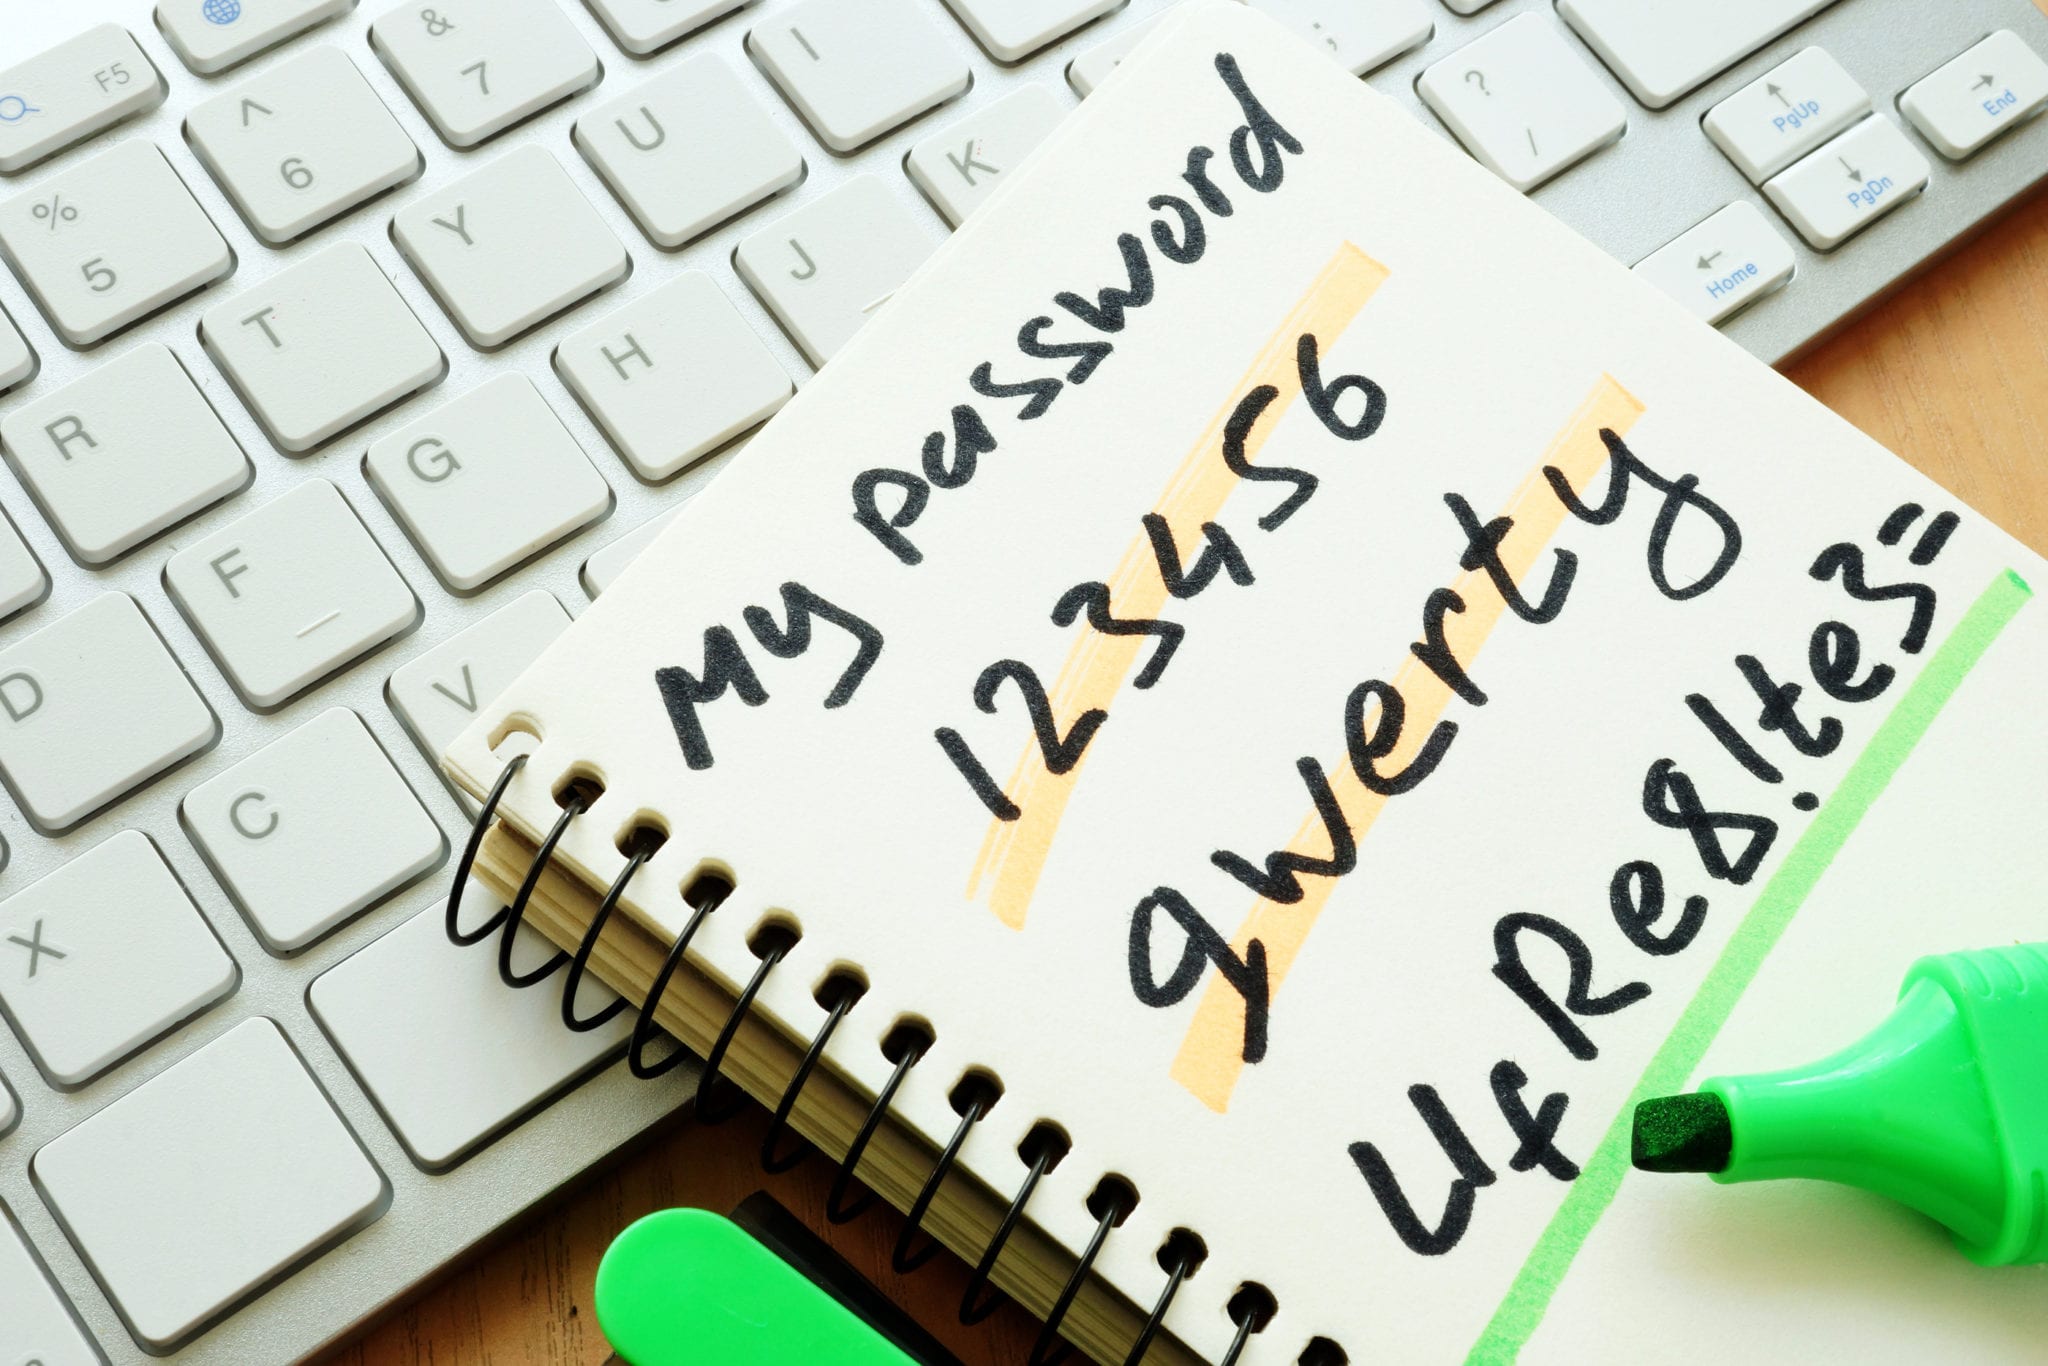 4-important-ways-to-secure-employee-passwords